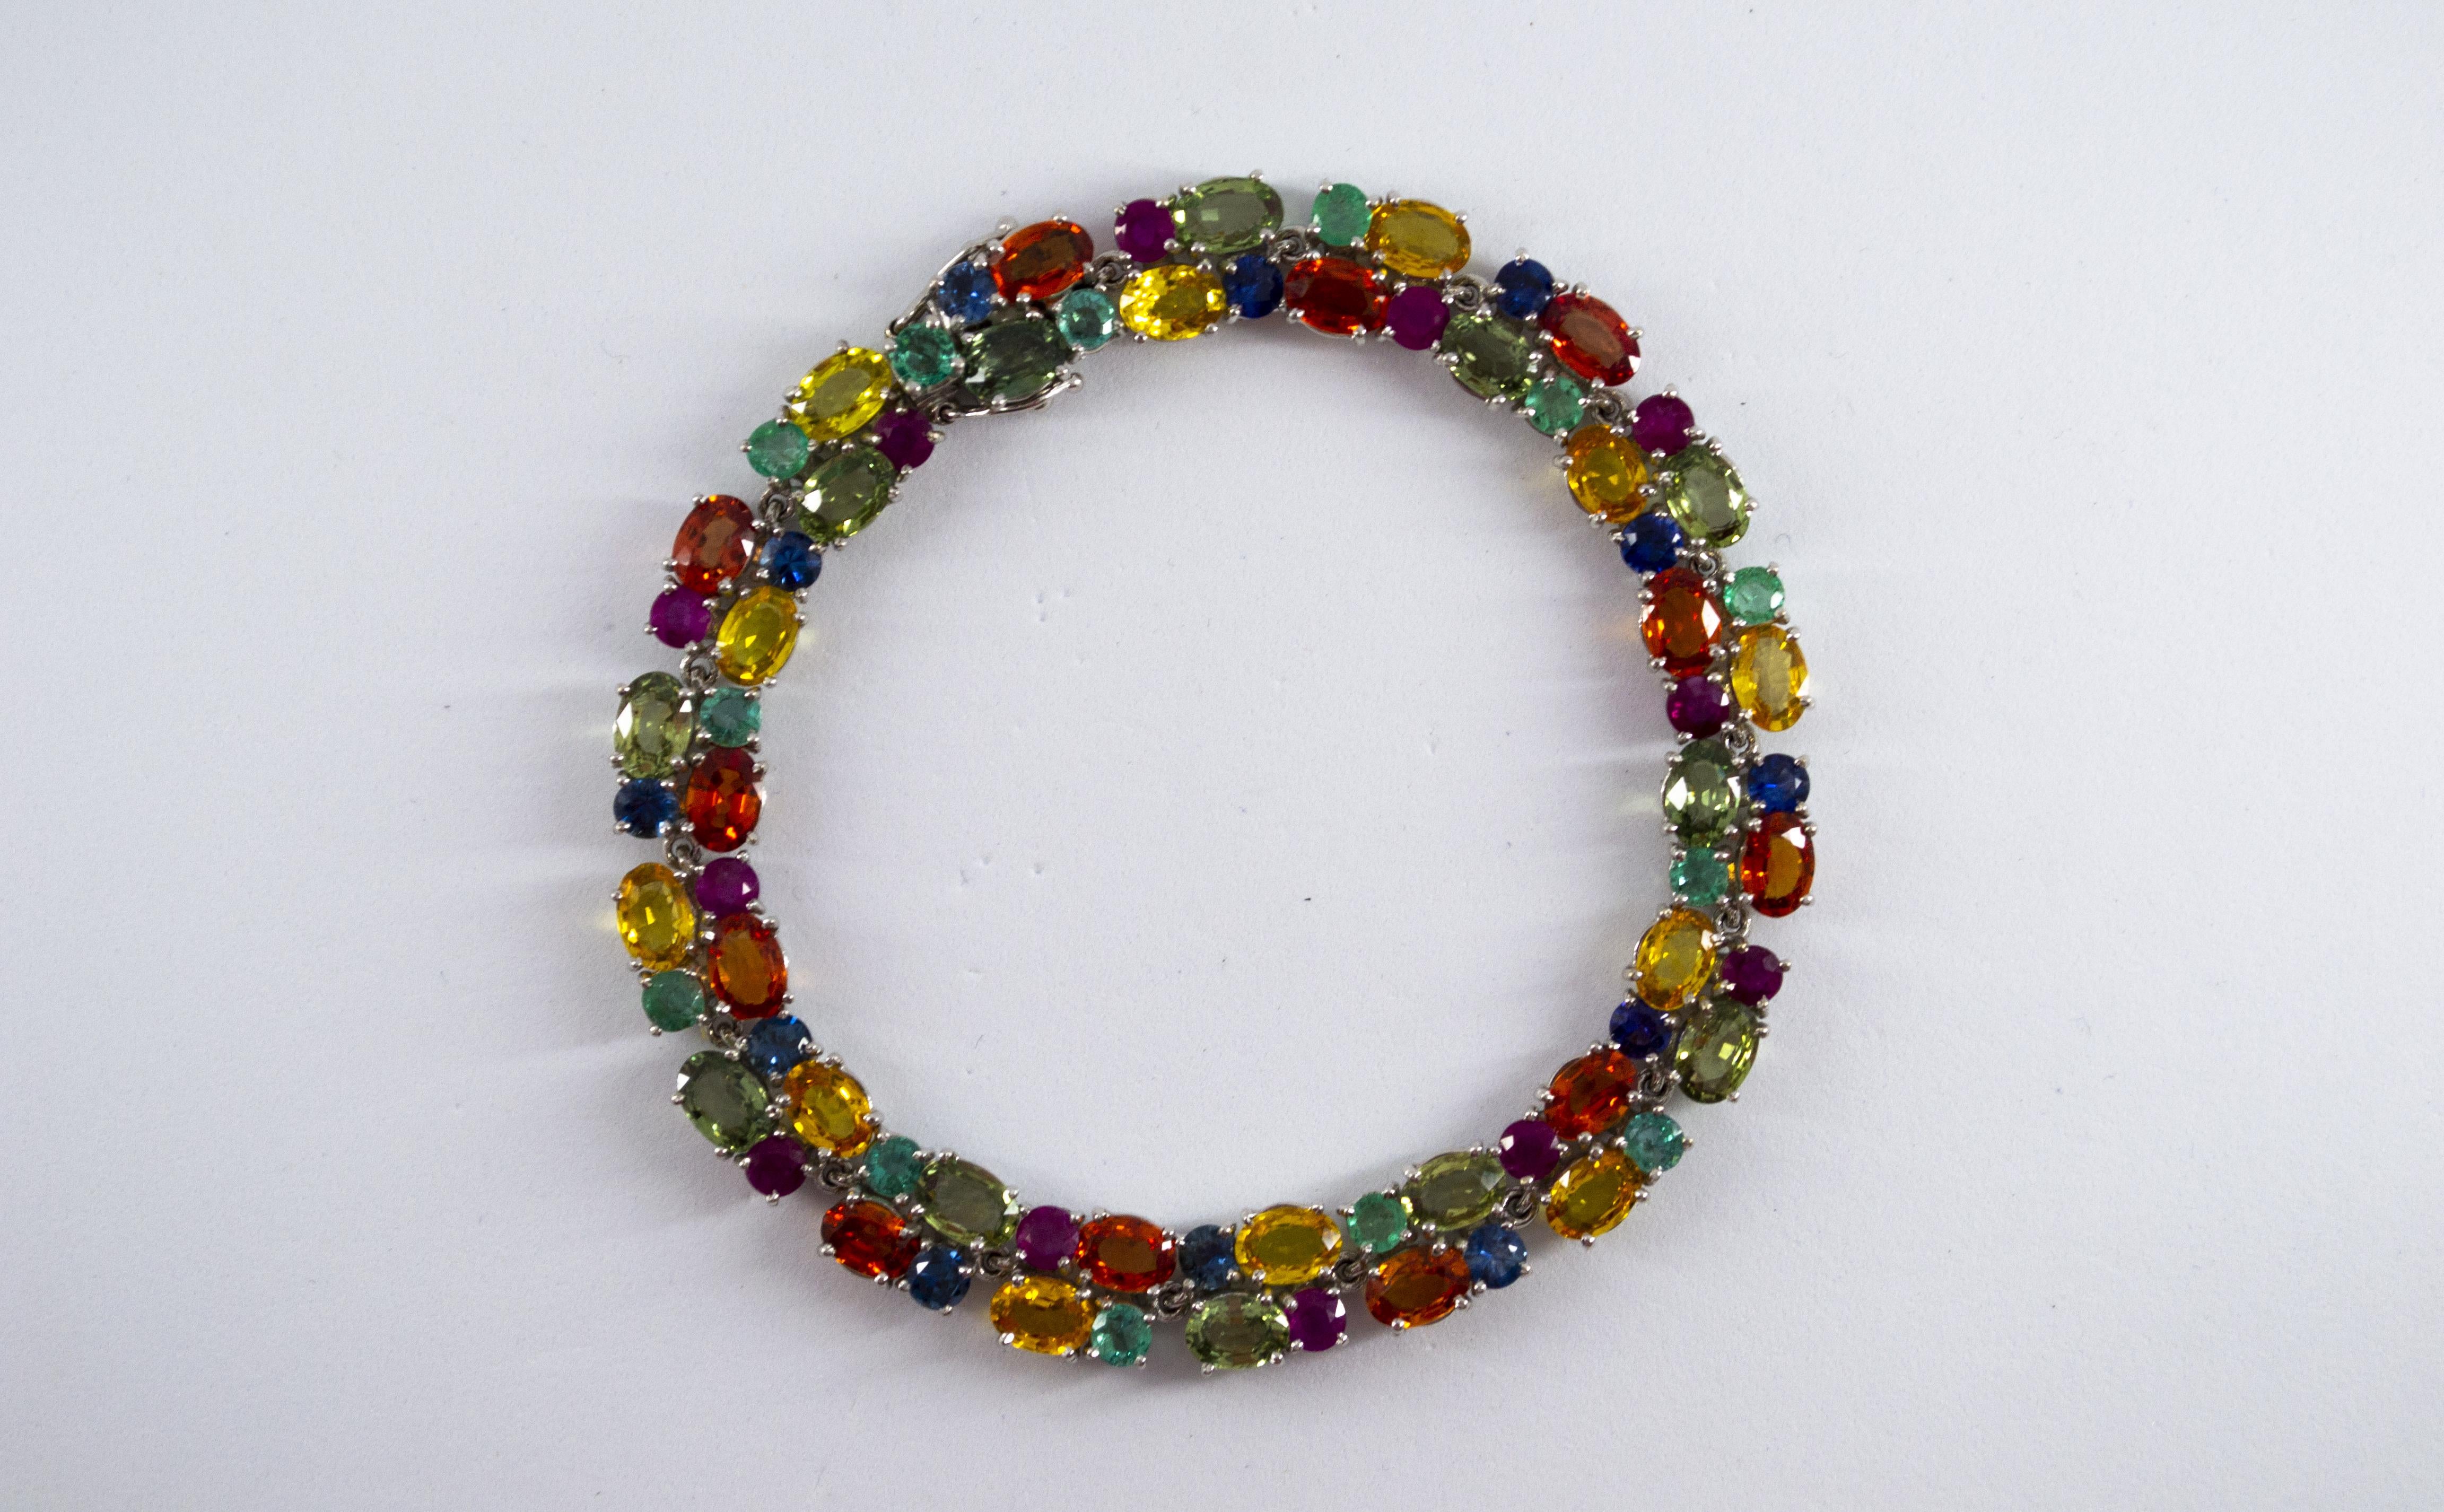 This Bracelet is made of 18K White Gold.
This Bracelet has 29.00 Carats of Rubies, Emeralds and Blue, Green and Yellow Sapphires.
This Bracelet is inspired by Art Deco.
We're a workshop so every piece is handmade, customizable and resizable.